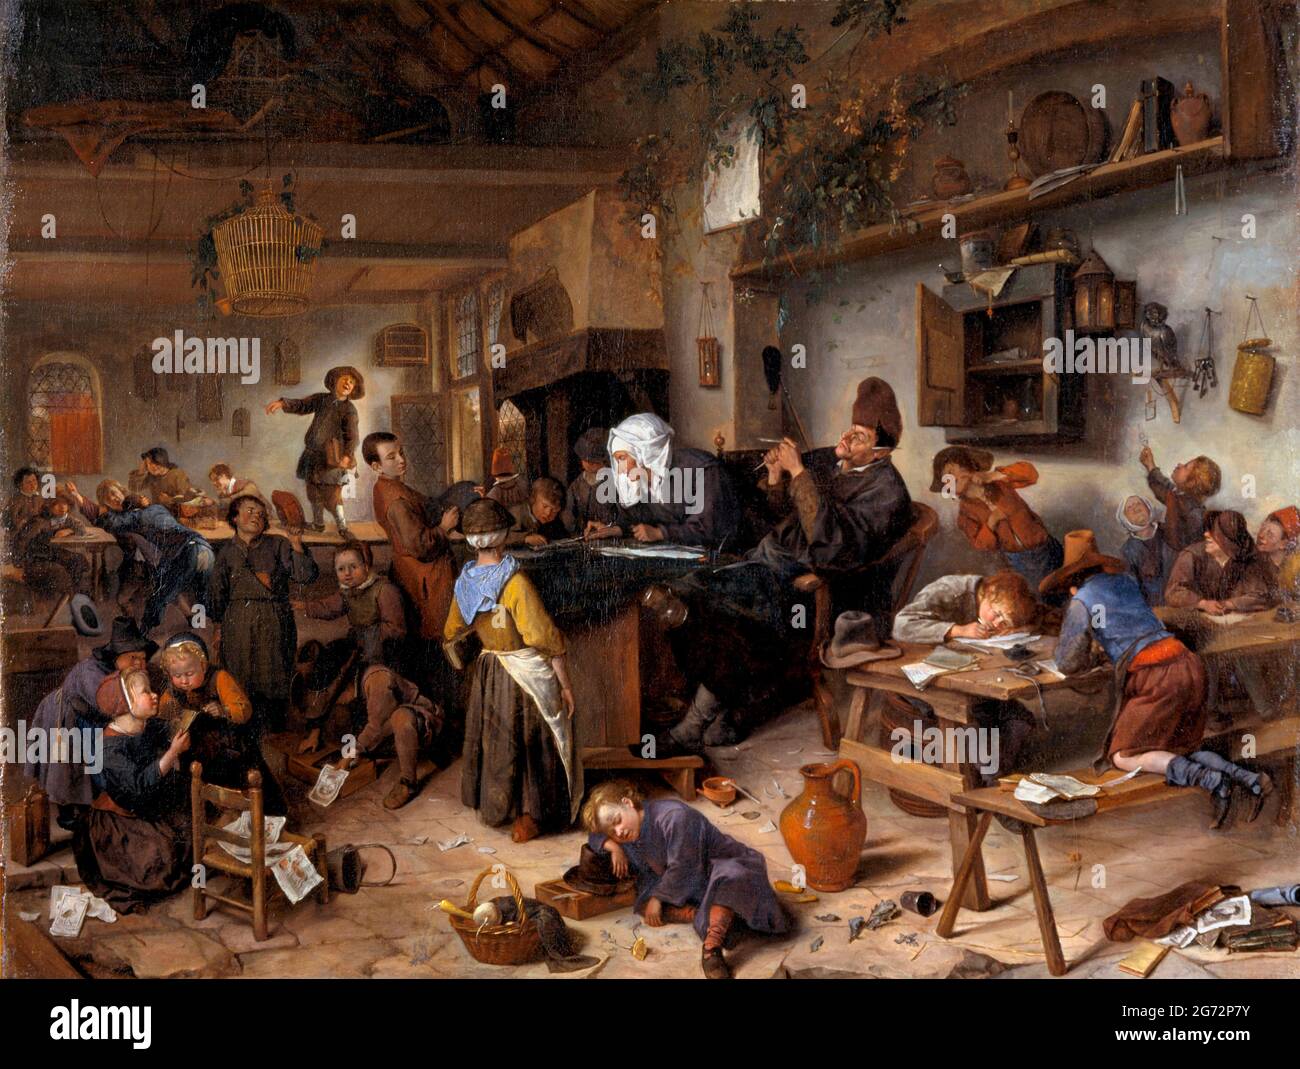 Jan Steen. A School for Boys and Girls by the Dutch Golden Age artist, Jan Havickszoon Steen (c. 1626-1679), oil on canvas, c. 1670 Stock Photo